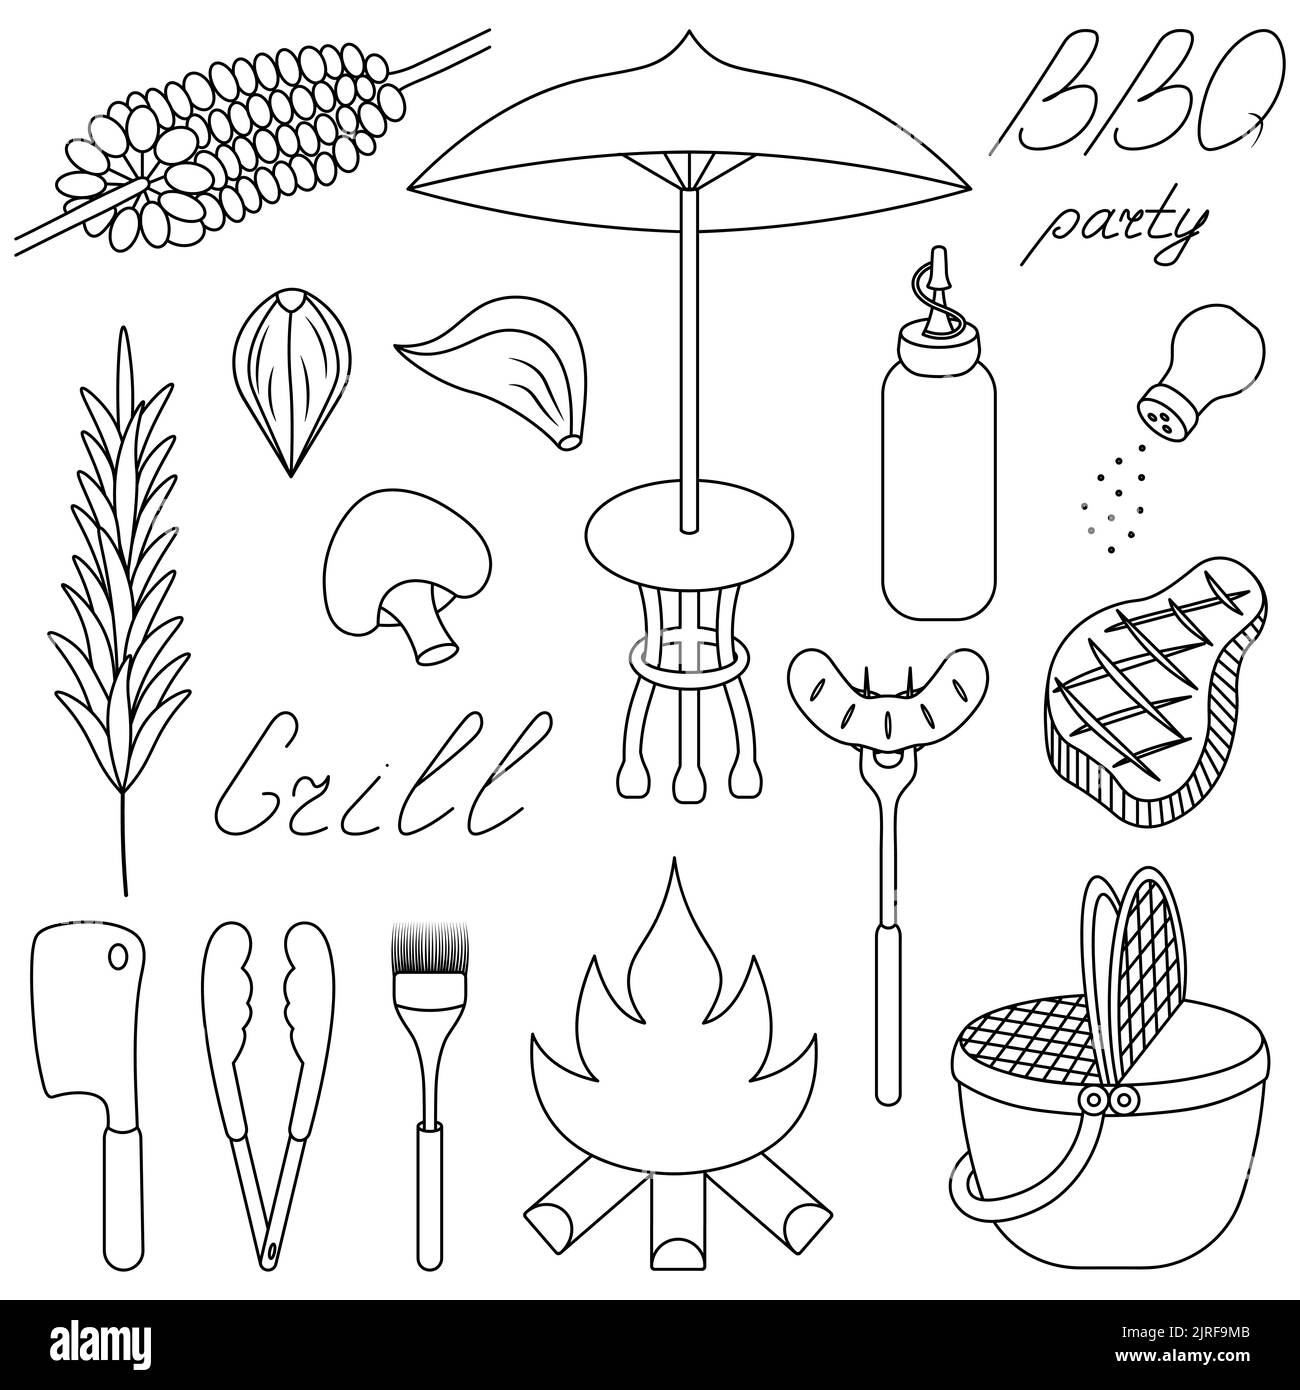 Set of outdoor recreation. Sketch. Collection of barbecue vector illustrations. Bonfire, basket, corn, steak. Coloring book. Isolated background. Stock Vector